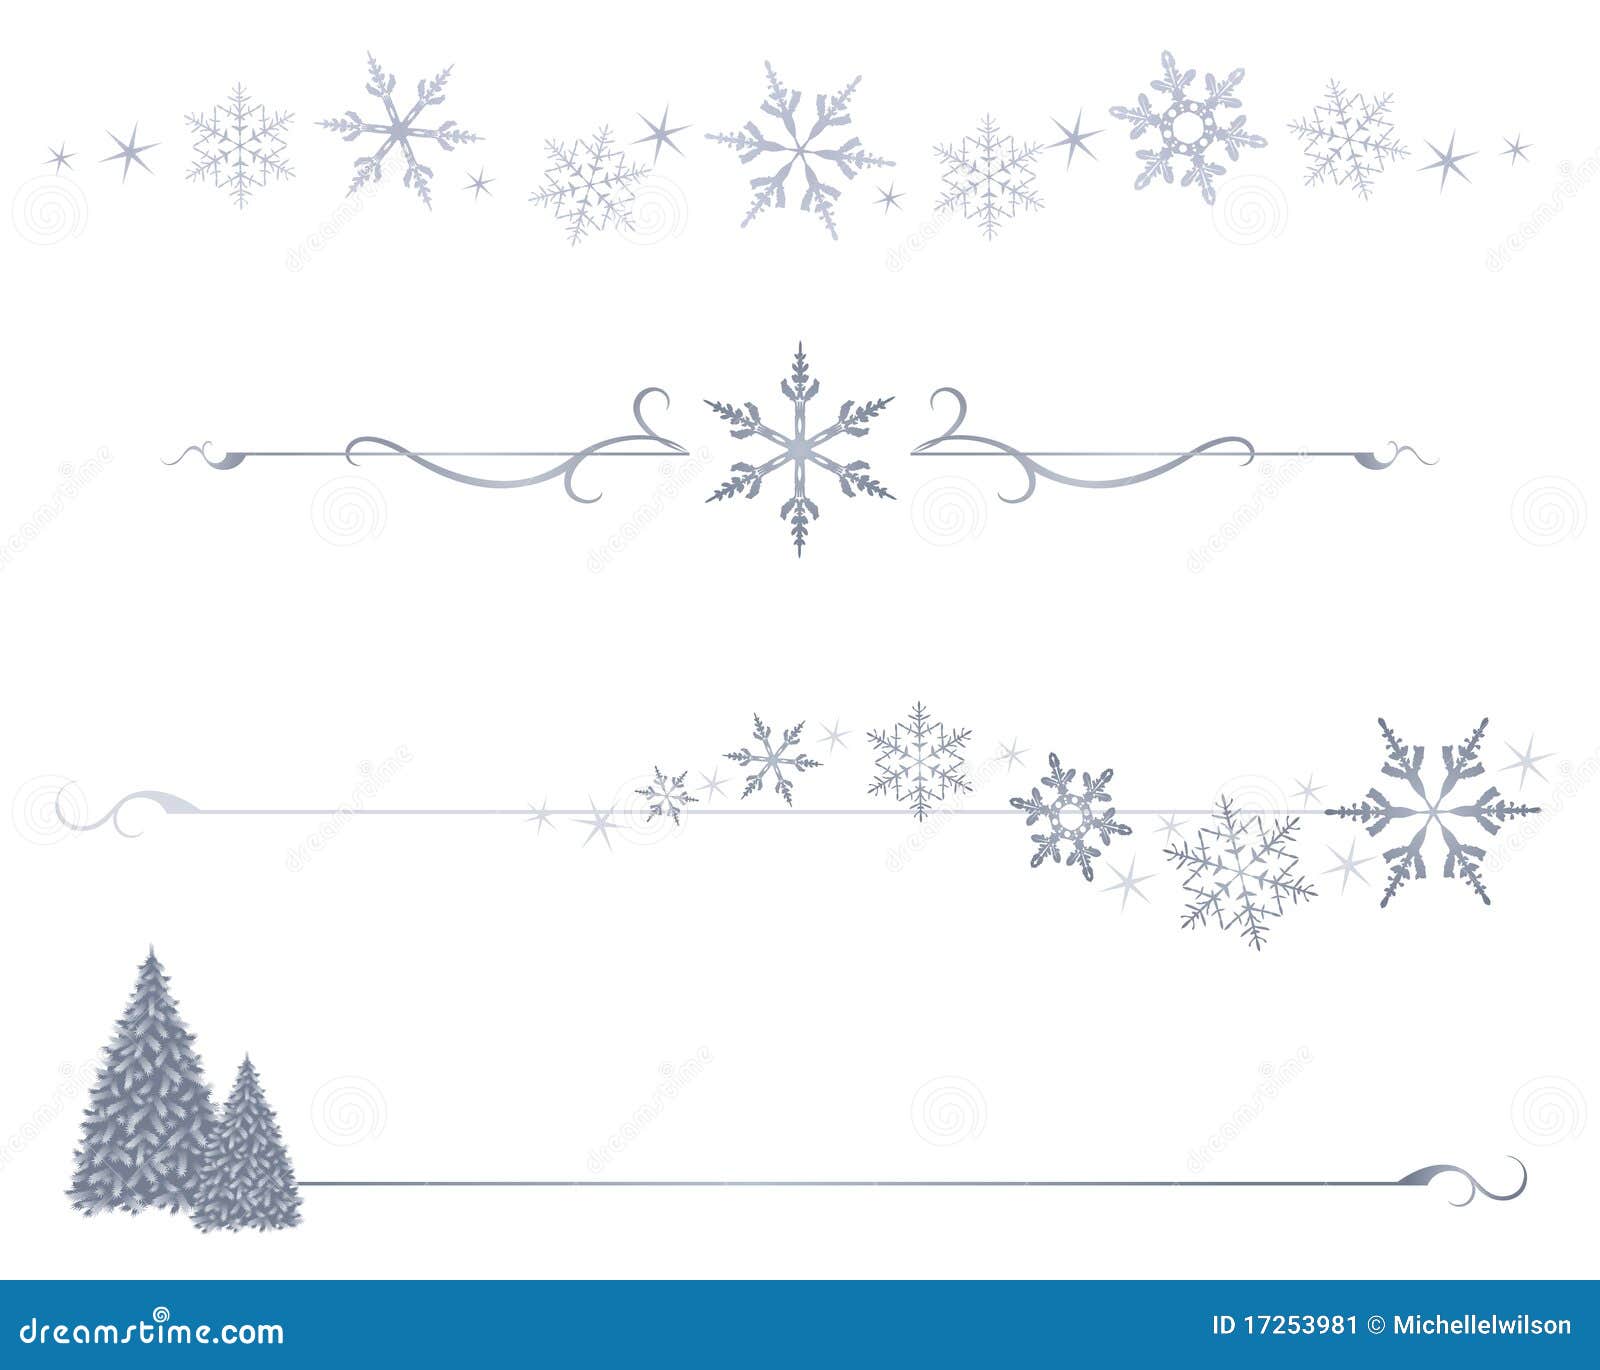 winter clipart lines - photo #8